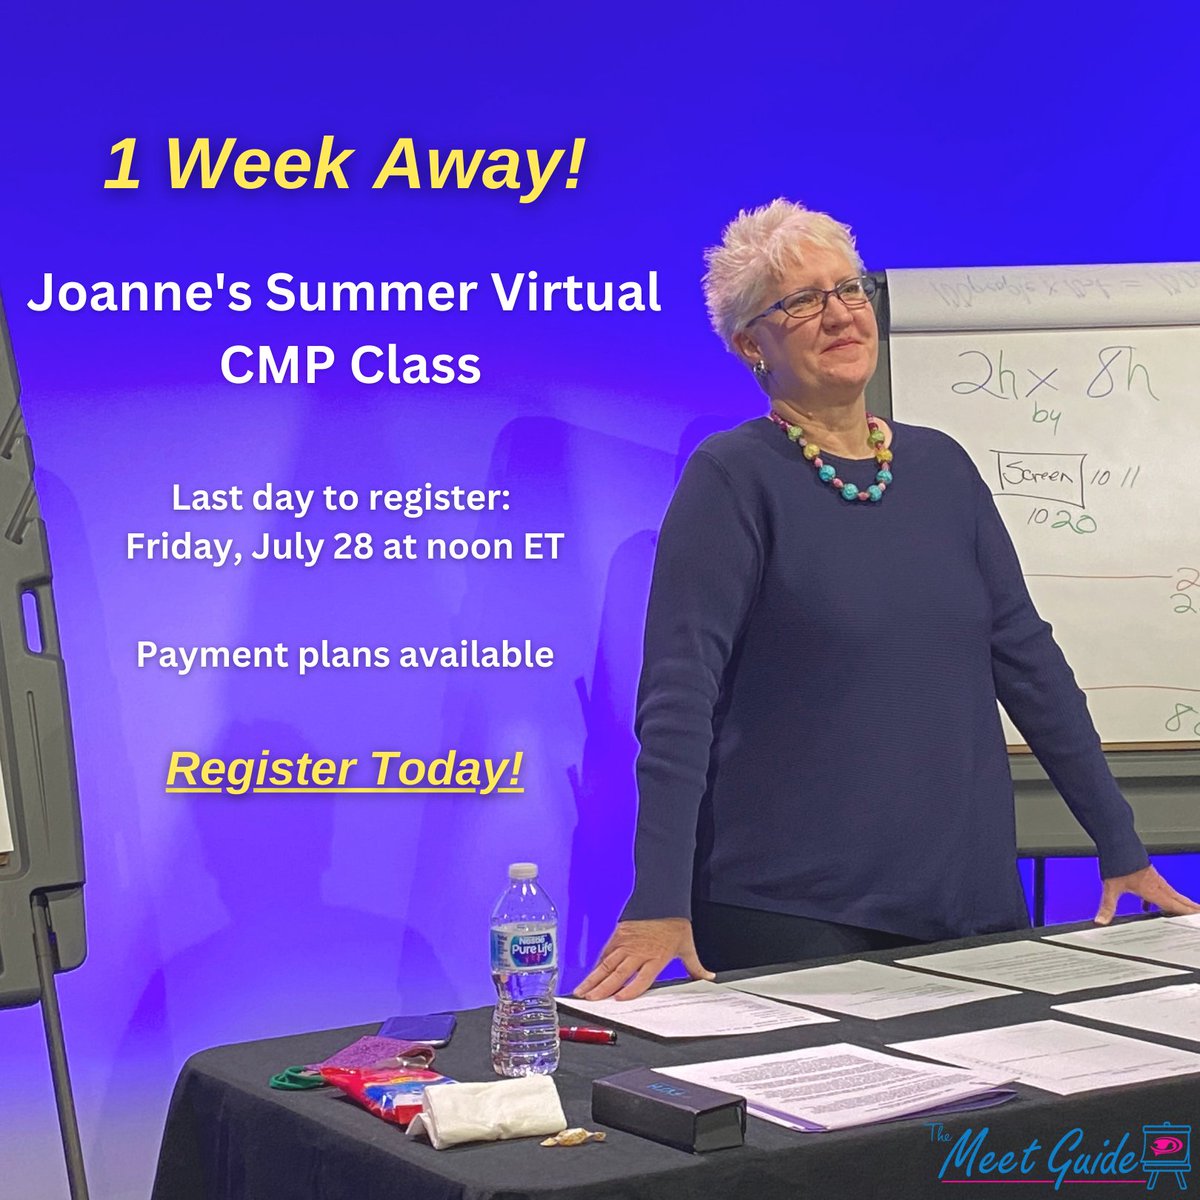 My CMP class is only 1 week away! Register before July 28 at noon ET: eventsquid.com/event/20336

Questions? Contact Joanne@JoanneDennison.com
#themeetguide #cmp #meetingsandevents #meetingprofs #eventprofs #miceindustry #eventplanners #hospitality #cmpclass #cmpprep #cmpexam